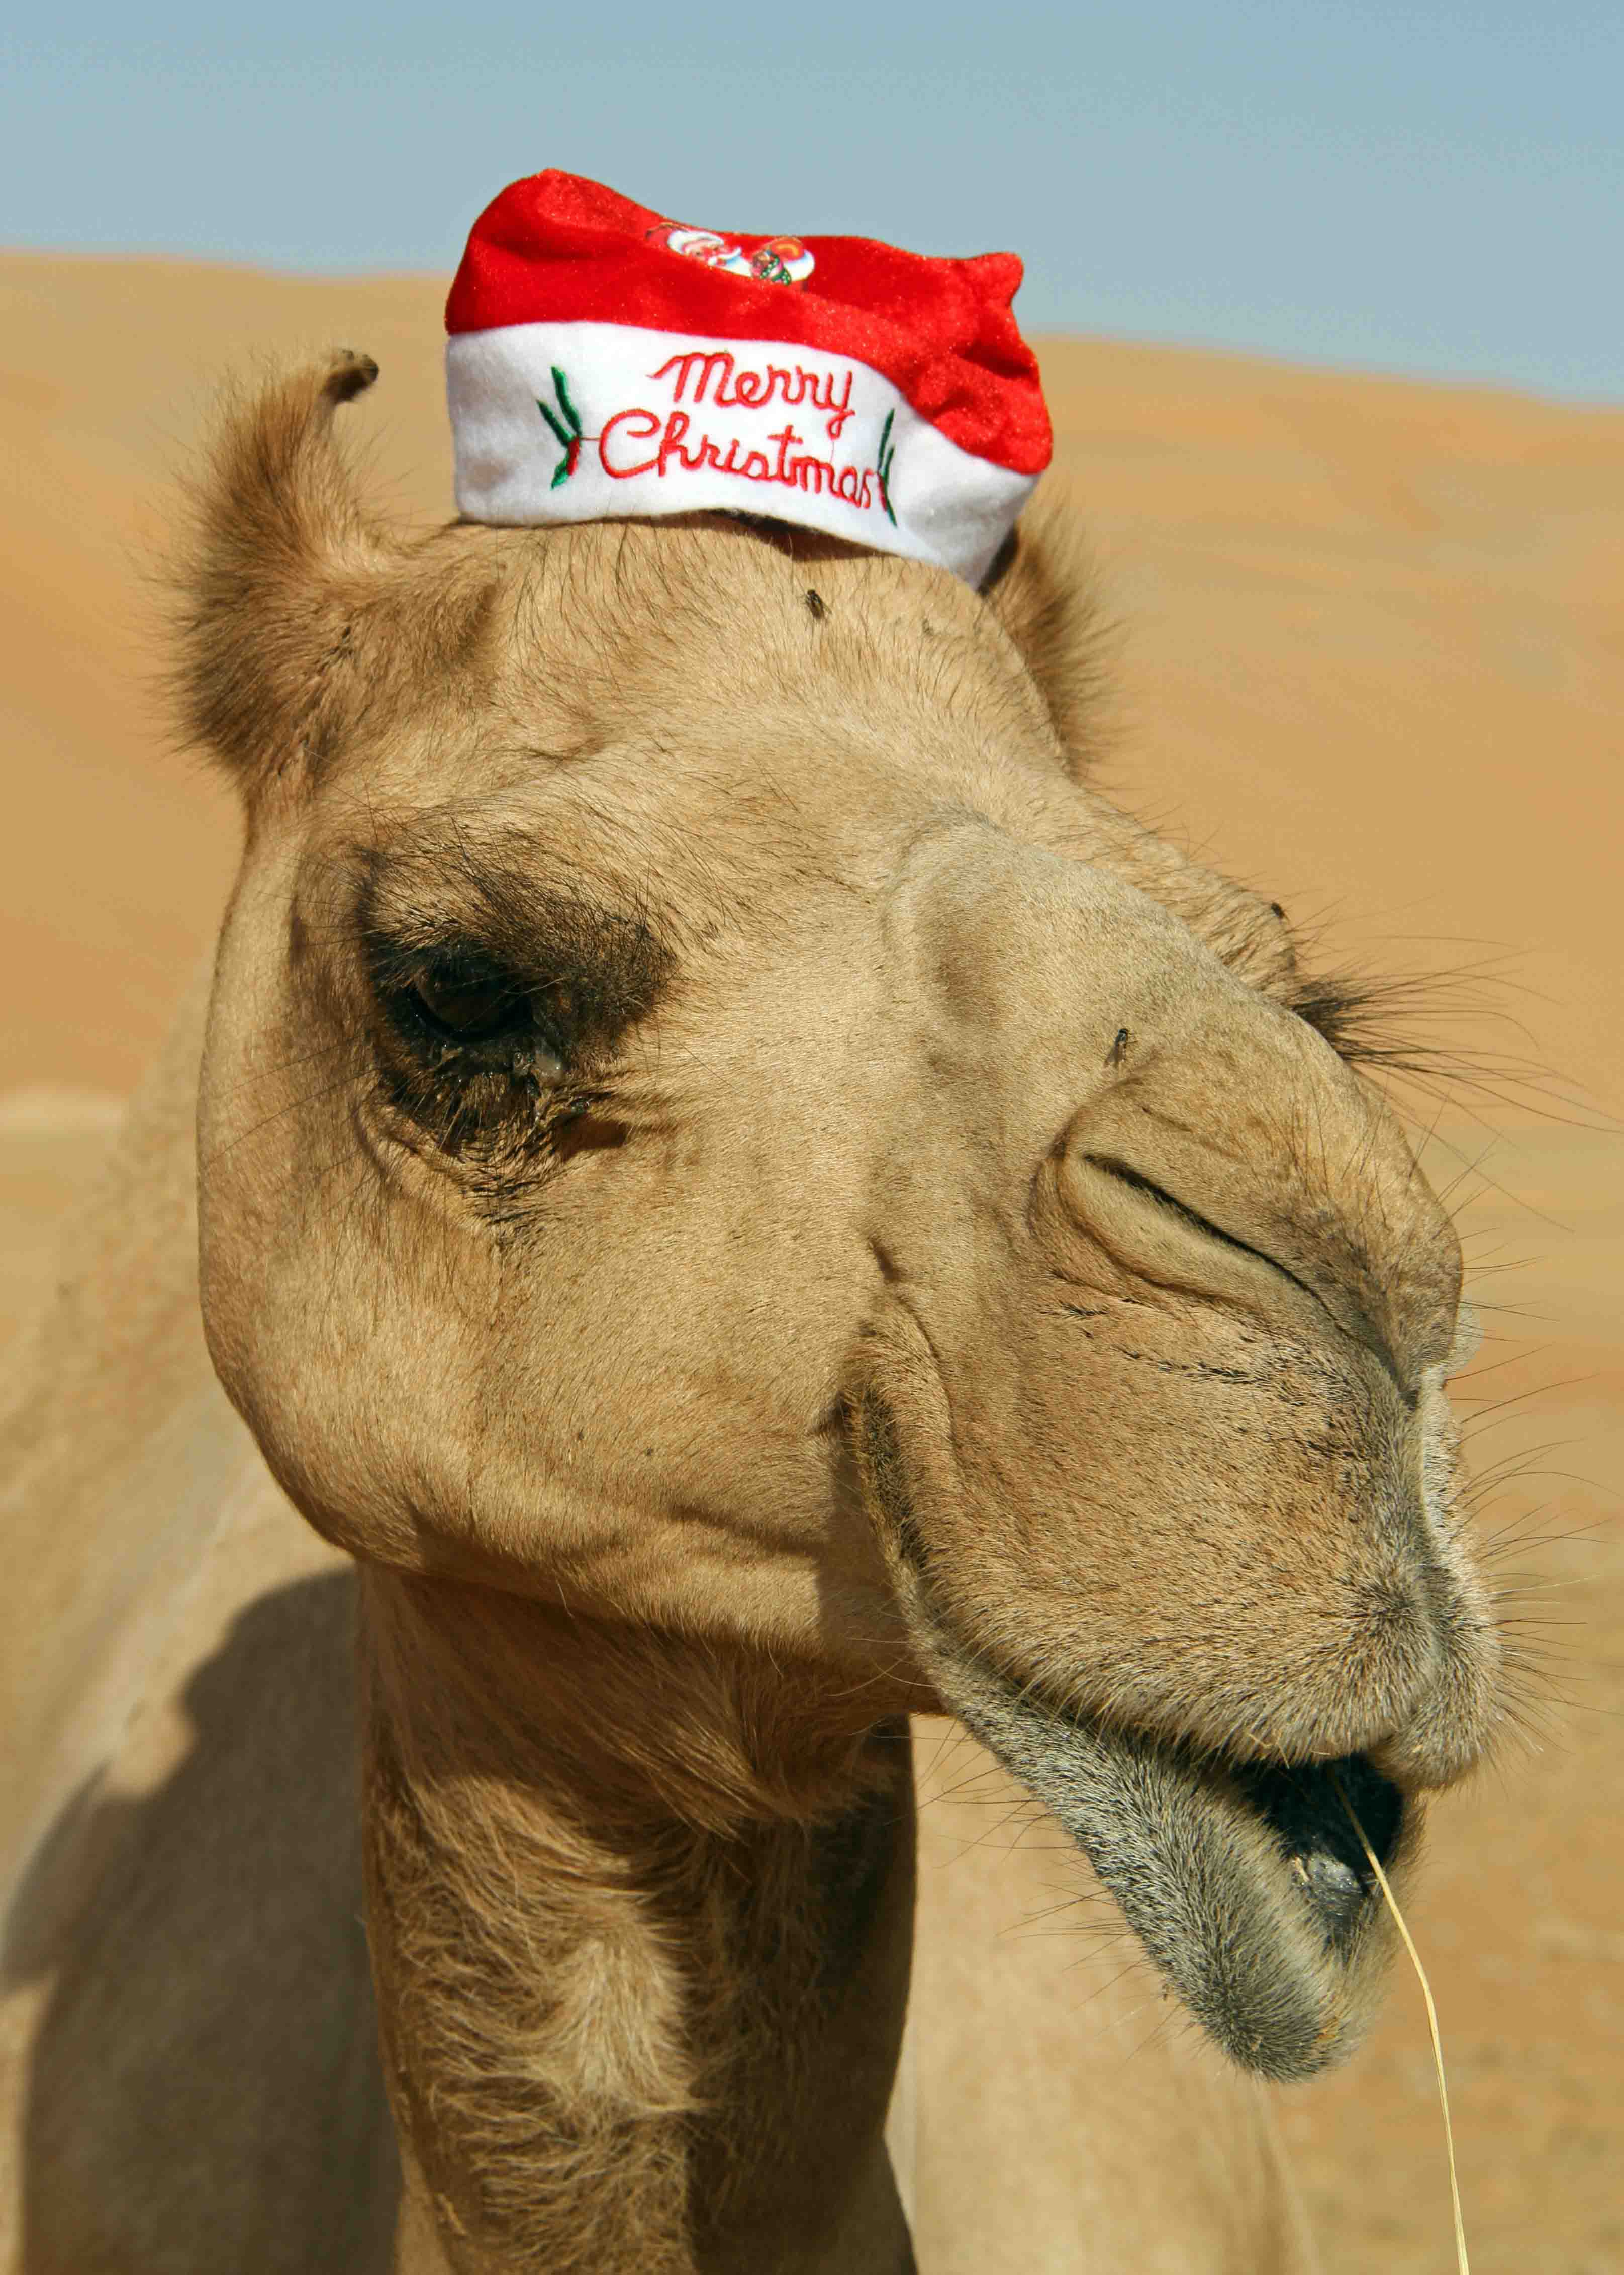 A very patient camel in the vast desert dunes known as the Empty Quarter wishes you all Merry Christmas!